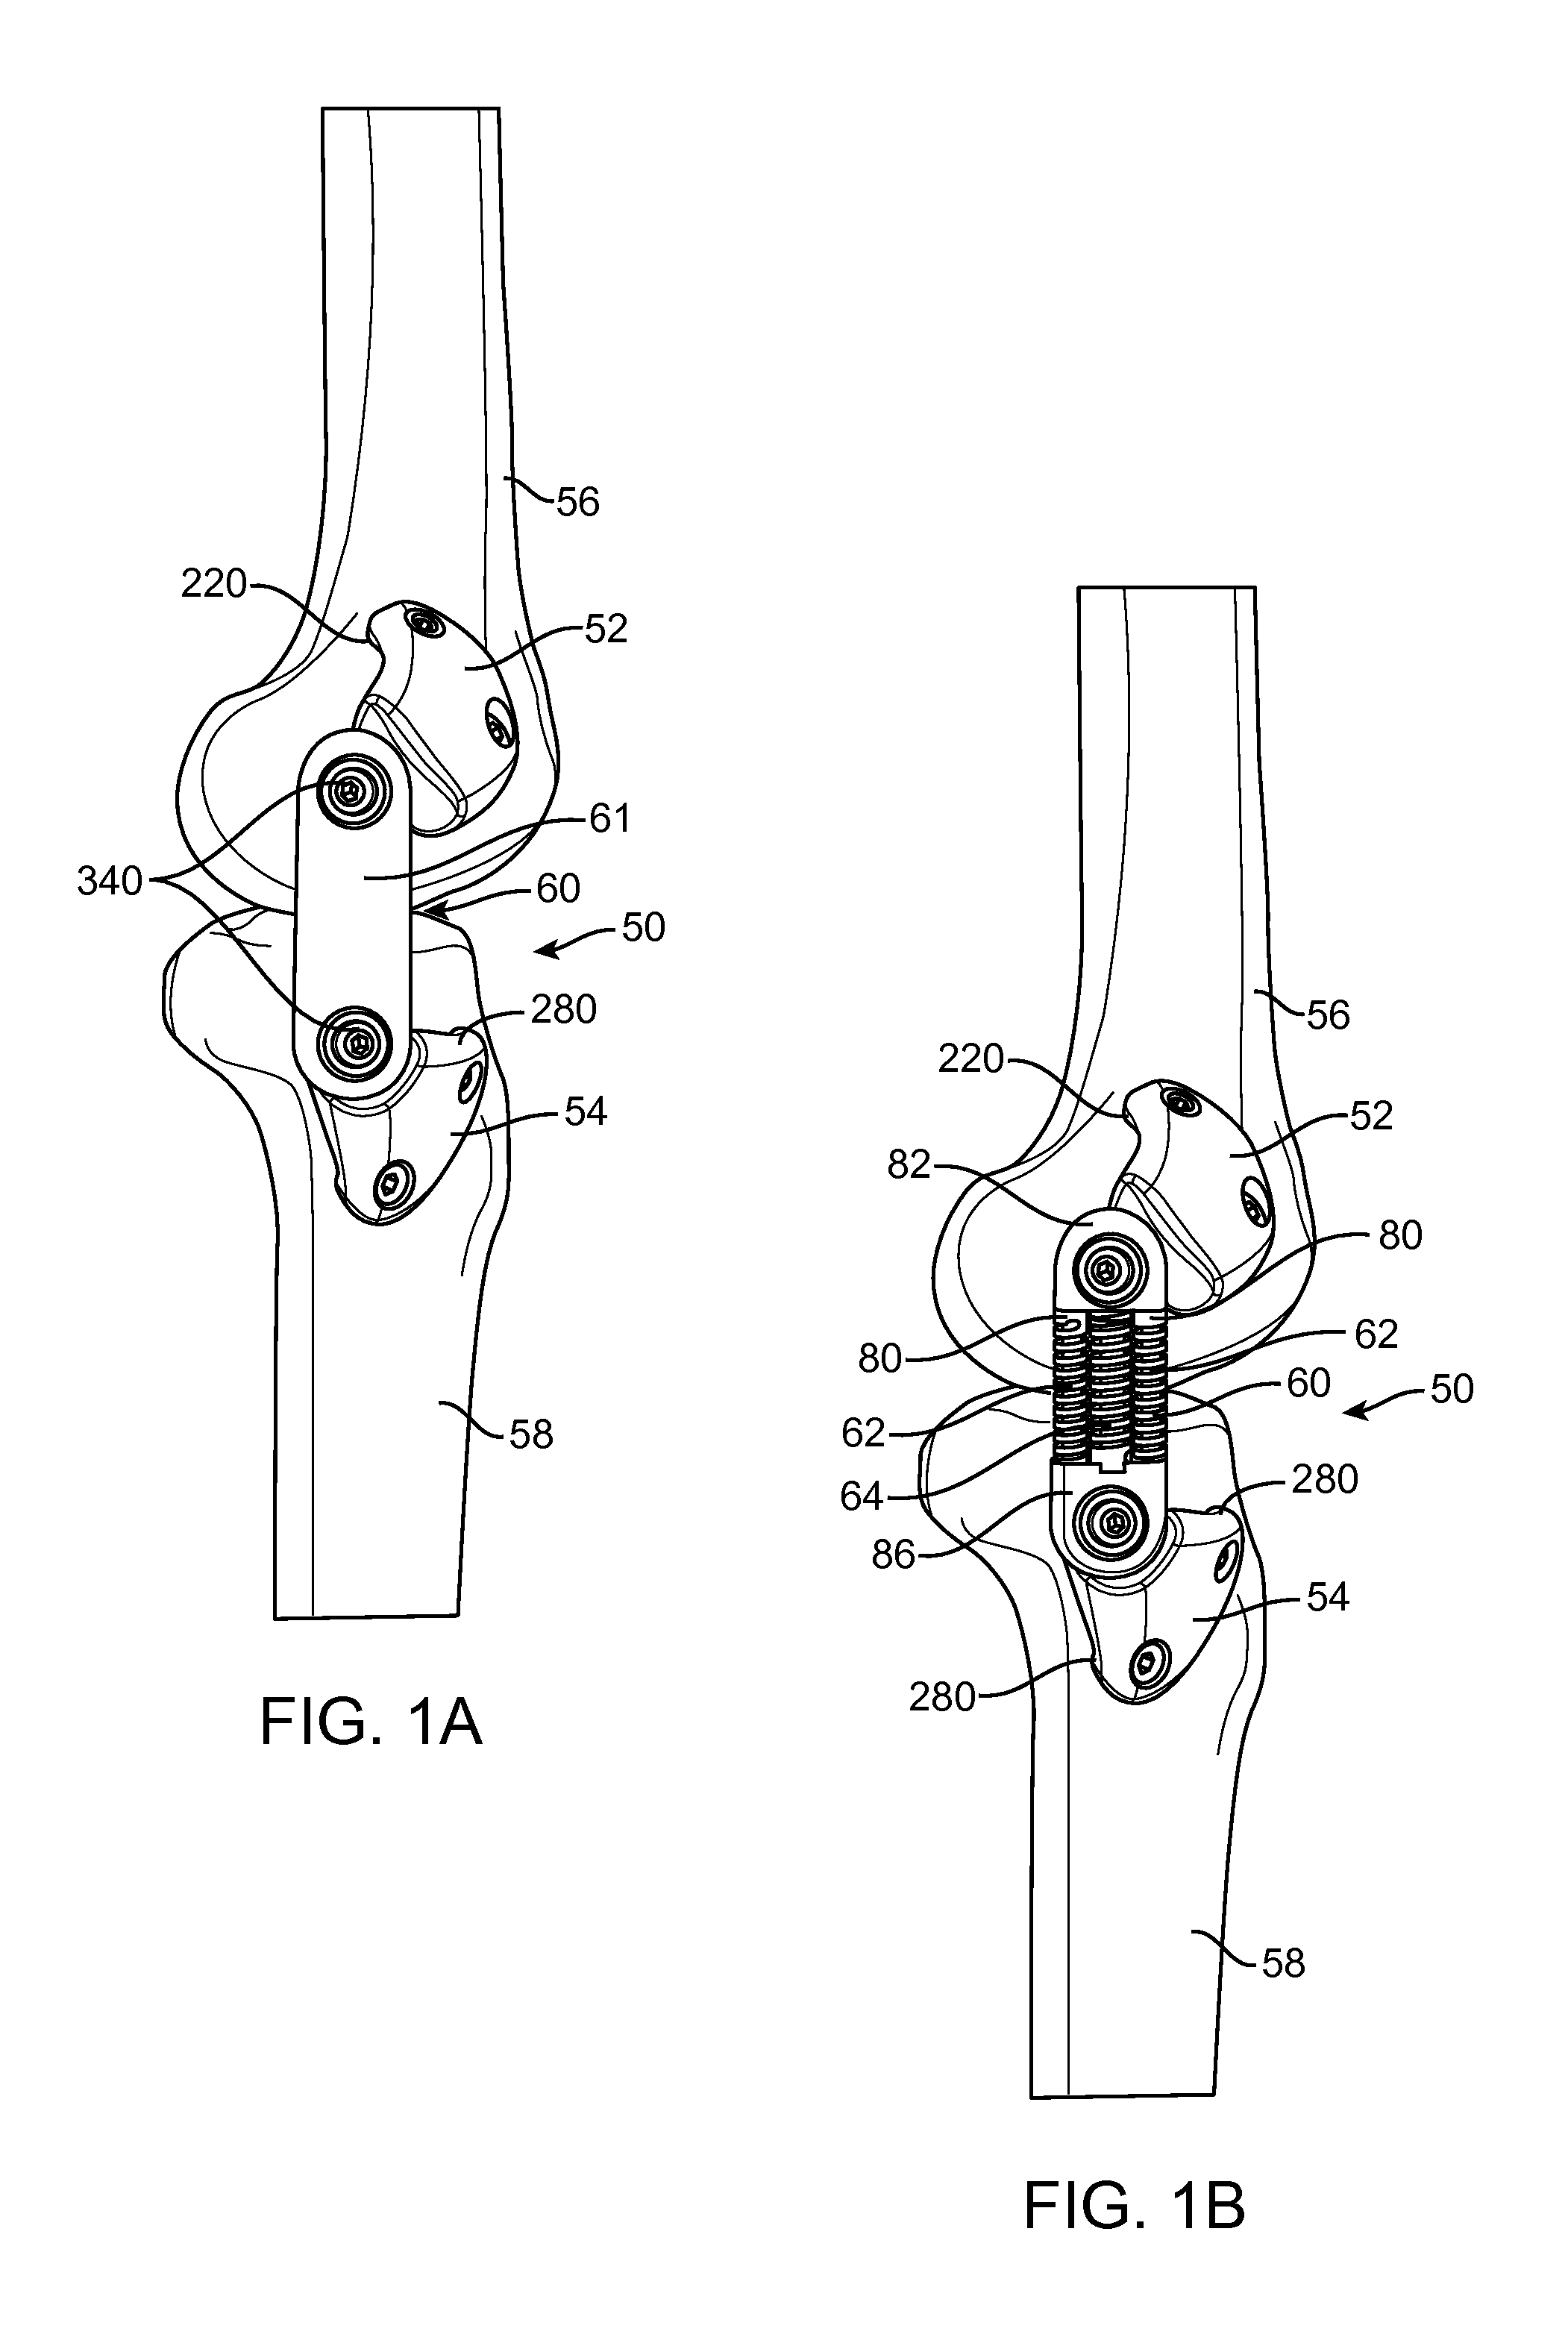 Implantation Approach and Instrumentality for an Energy Absorbing System